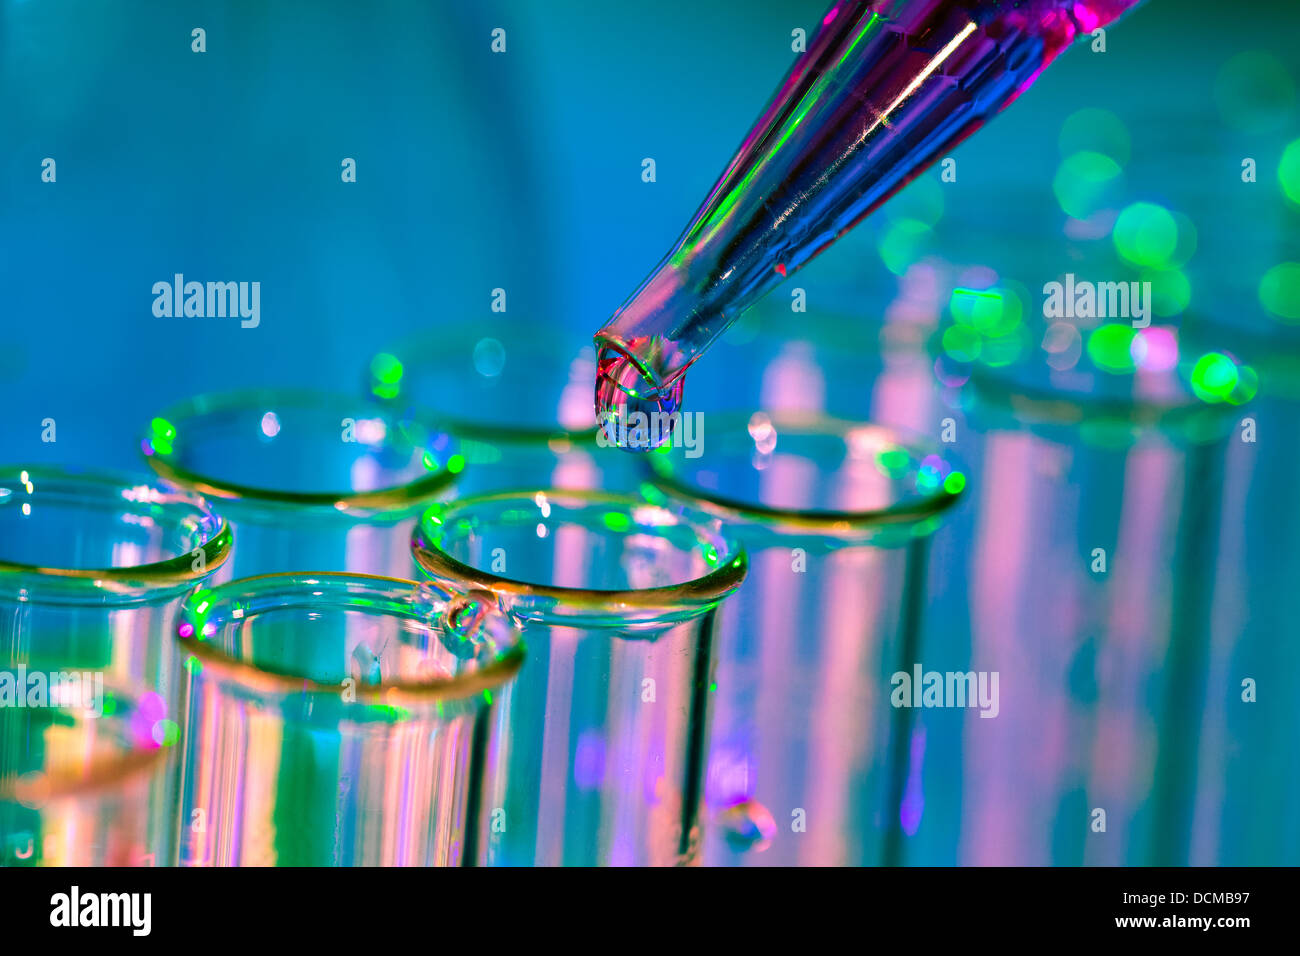 Pipette adding fluid to one of several test tubes Stock Photo